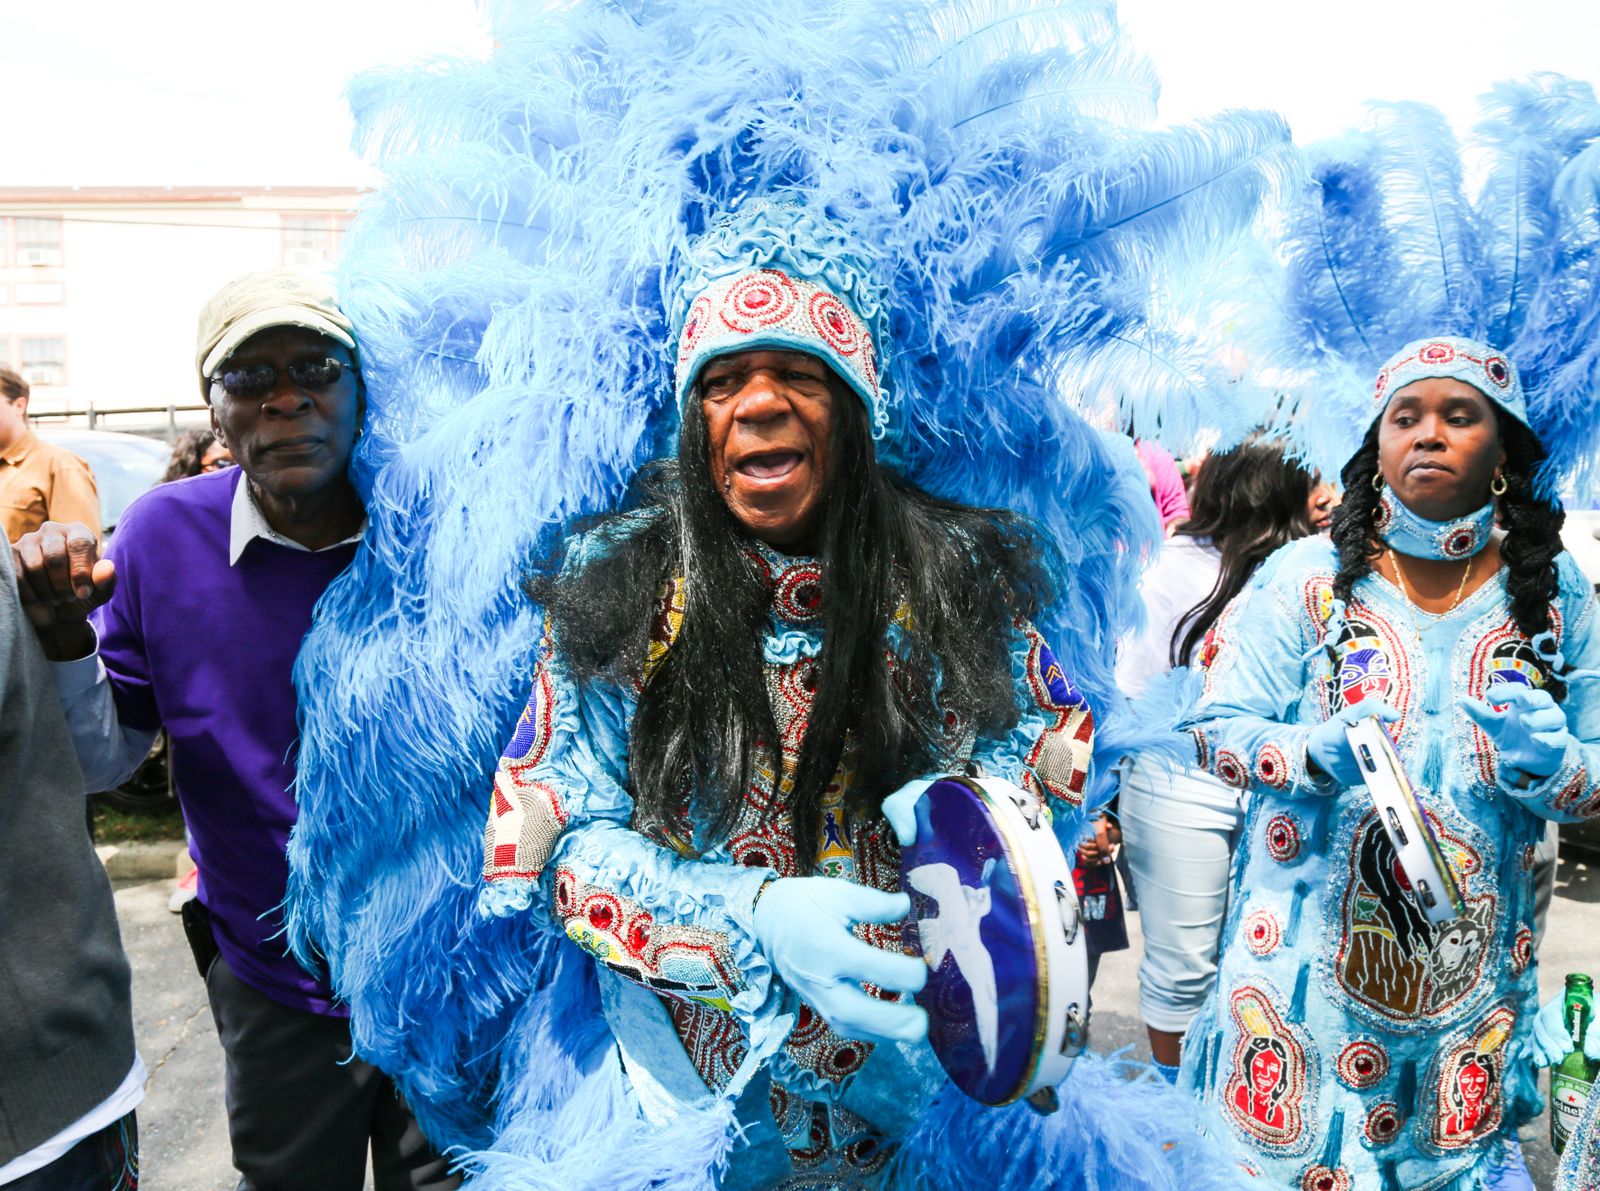 What You Should Know About the Mardi Gras Indians